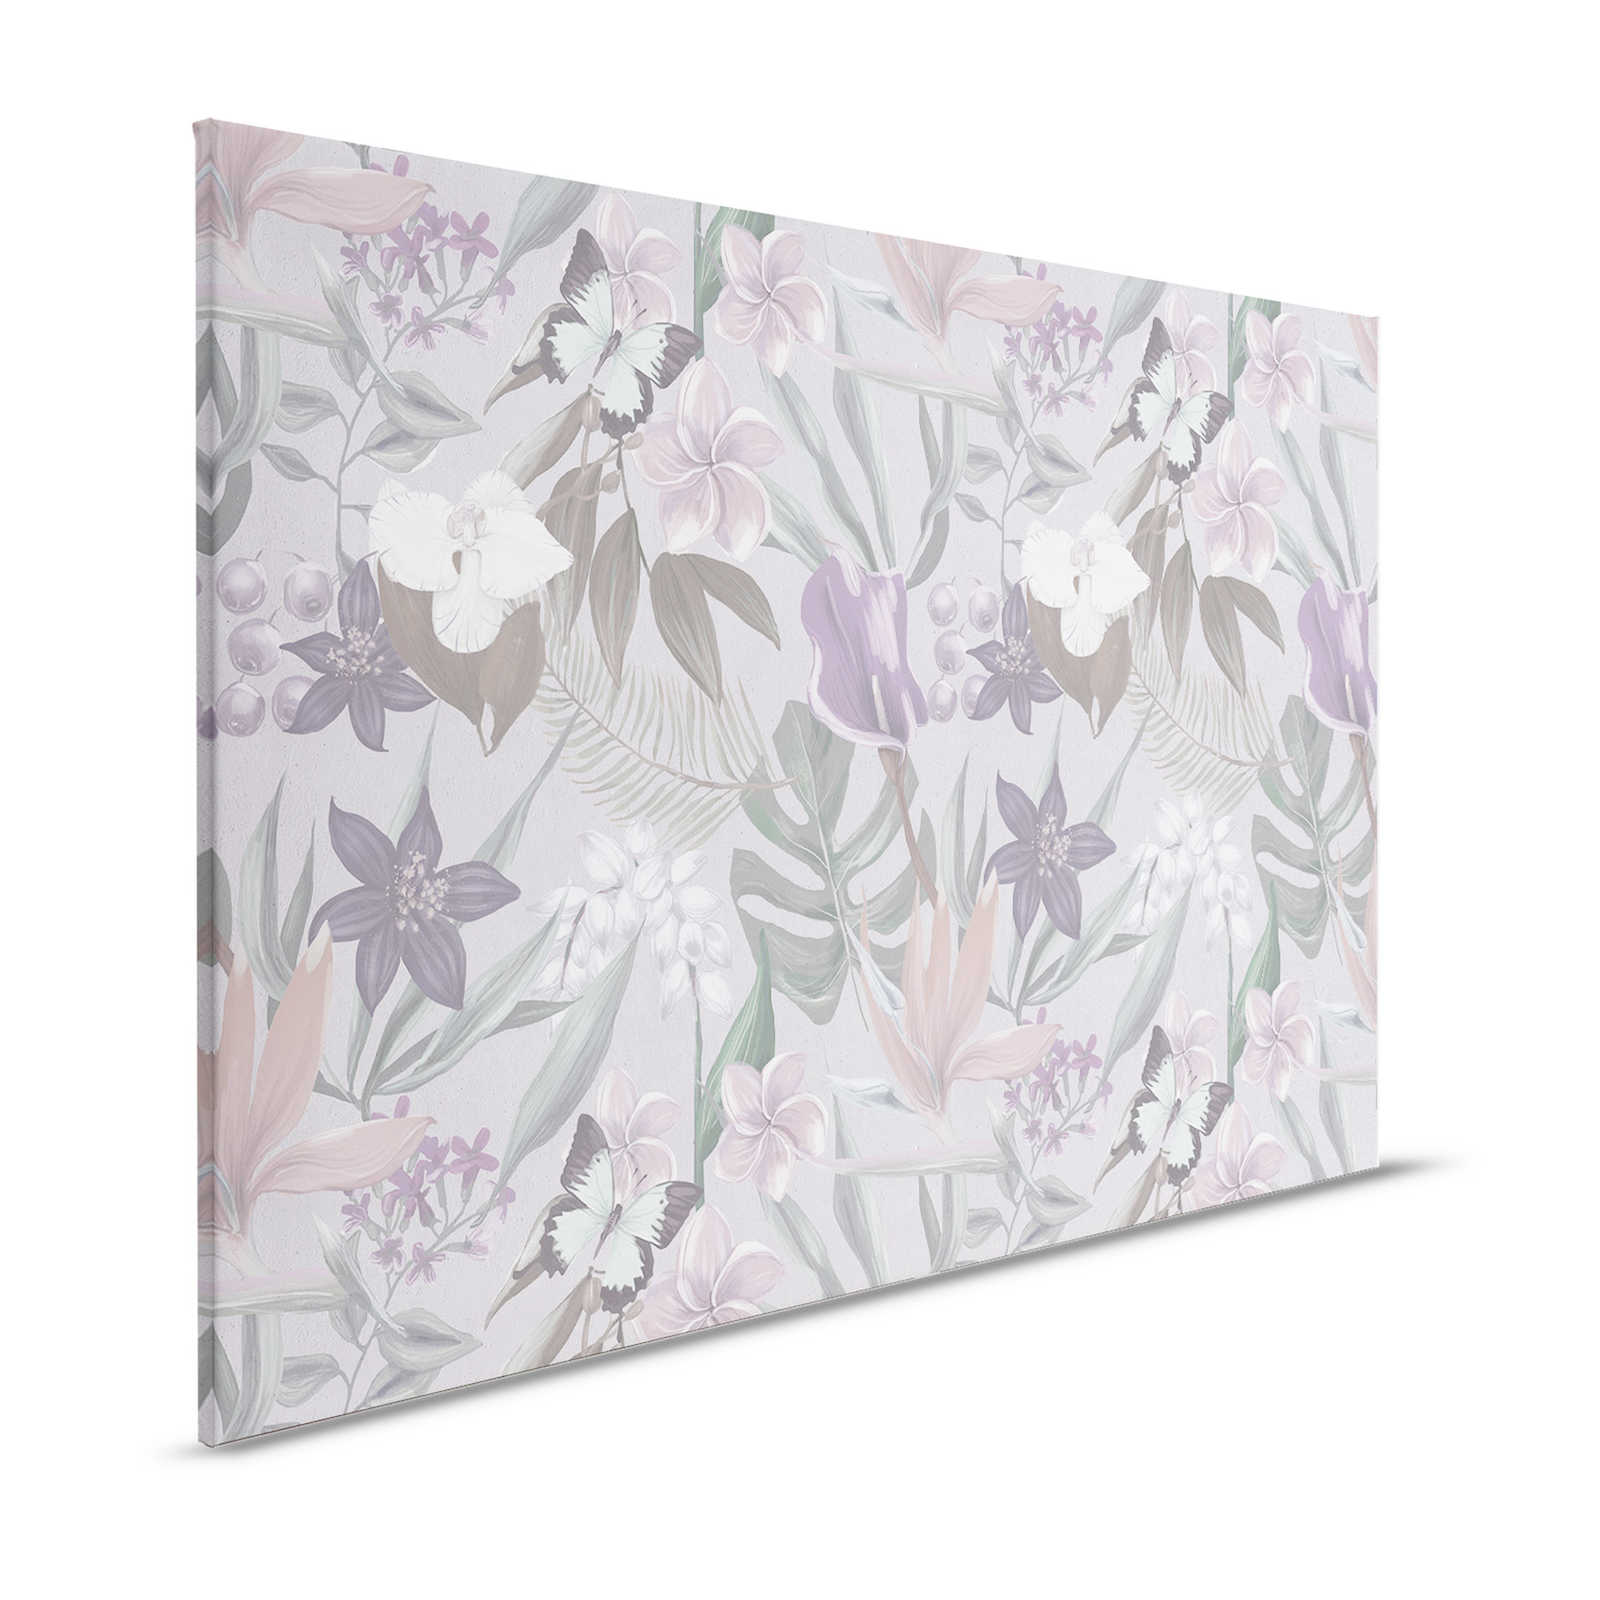 Floral Jungle Canvas Painting drawn | pink, white - 1.20 m x 0.80 m
